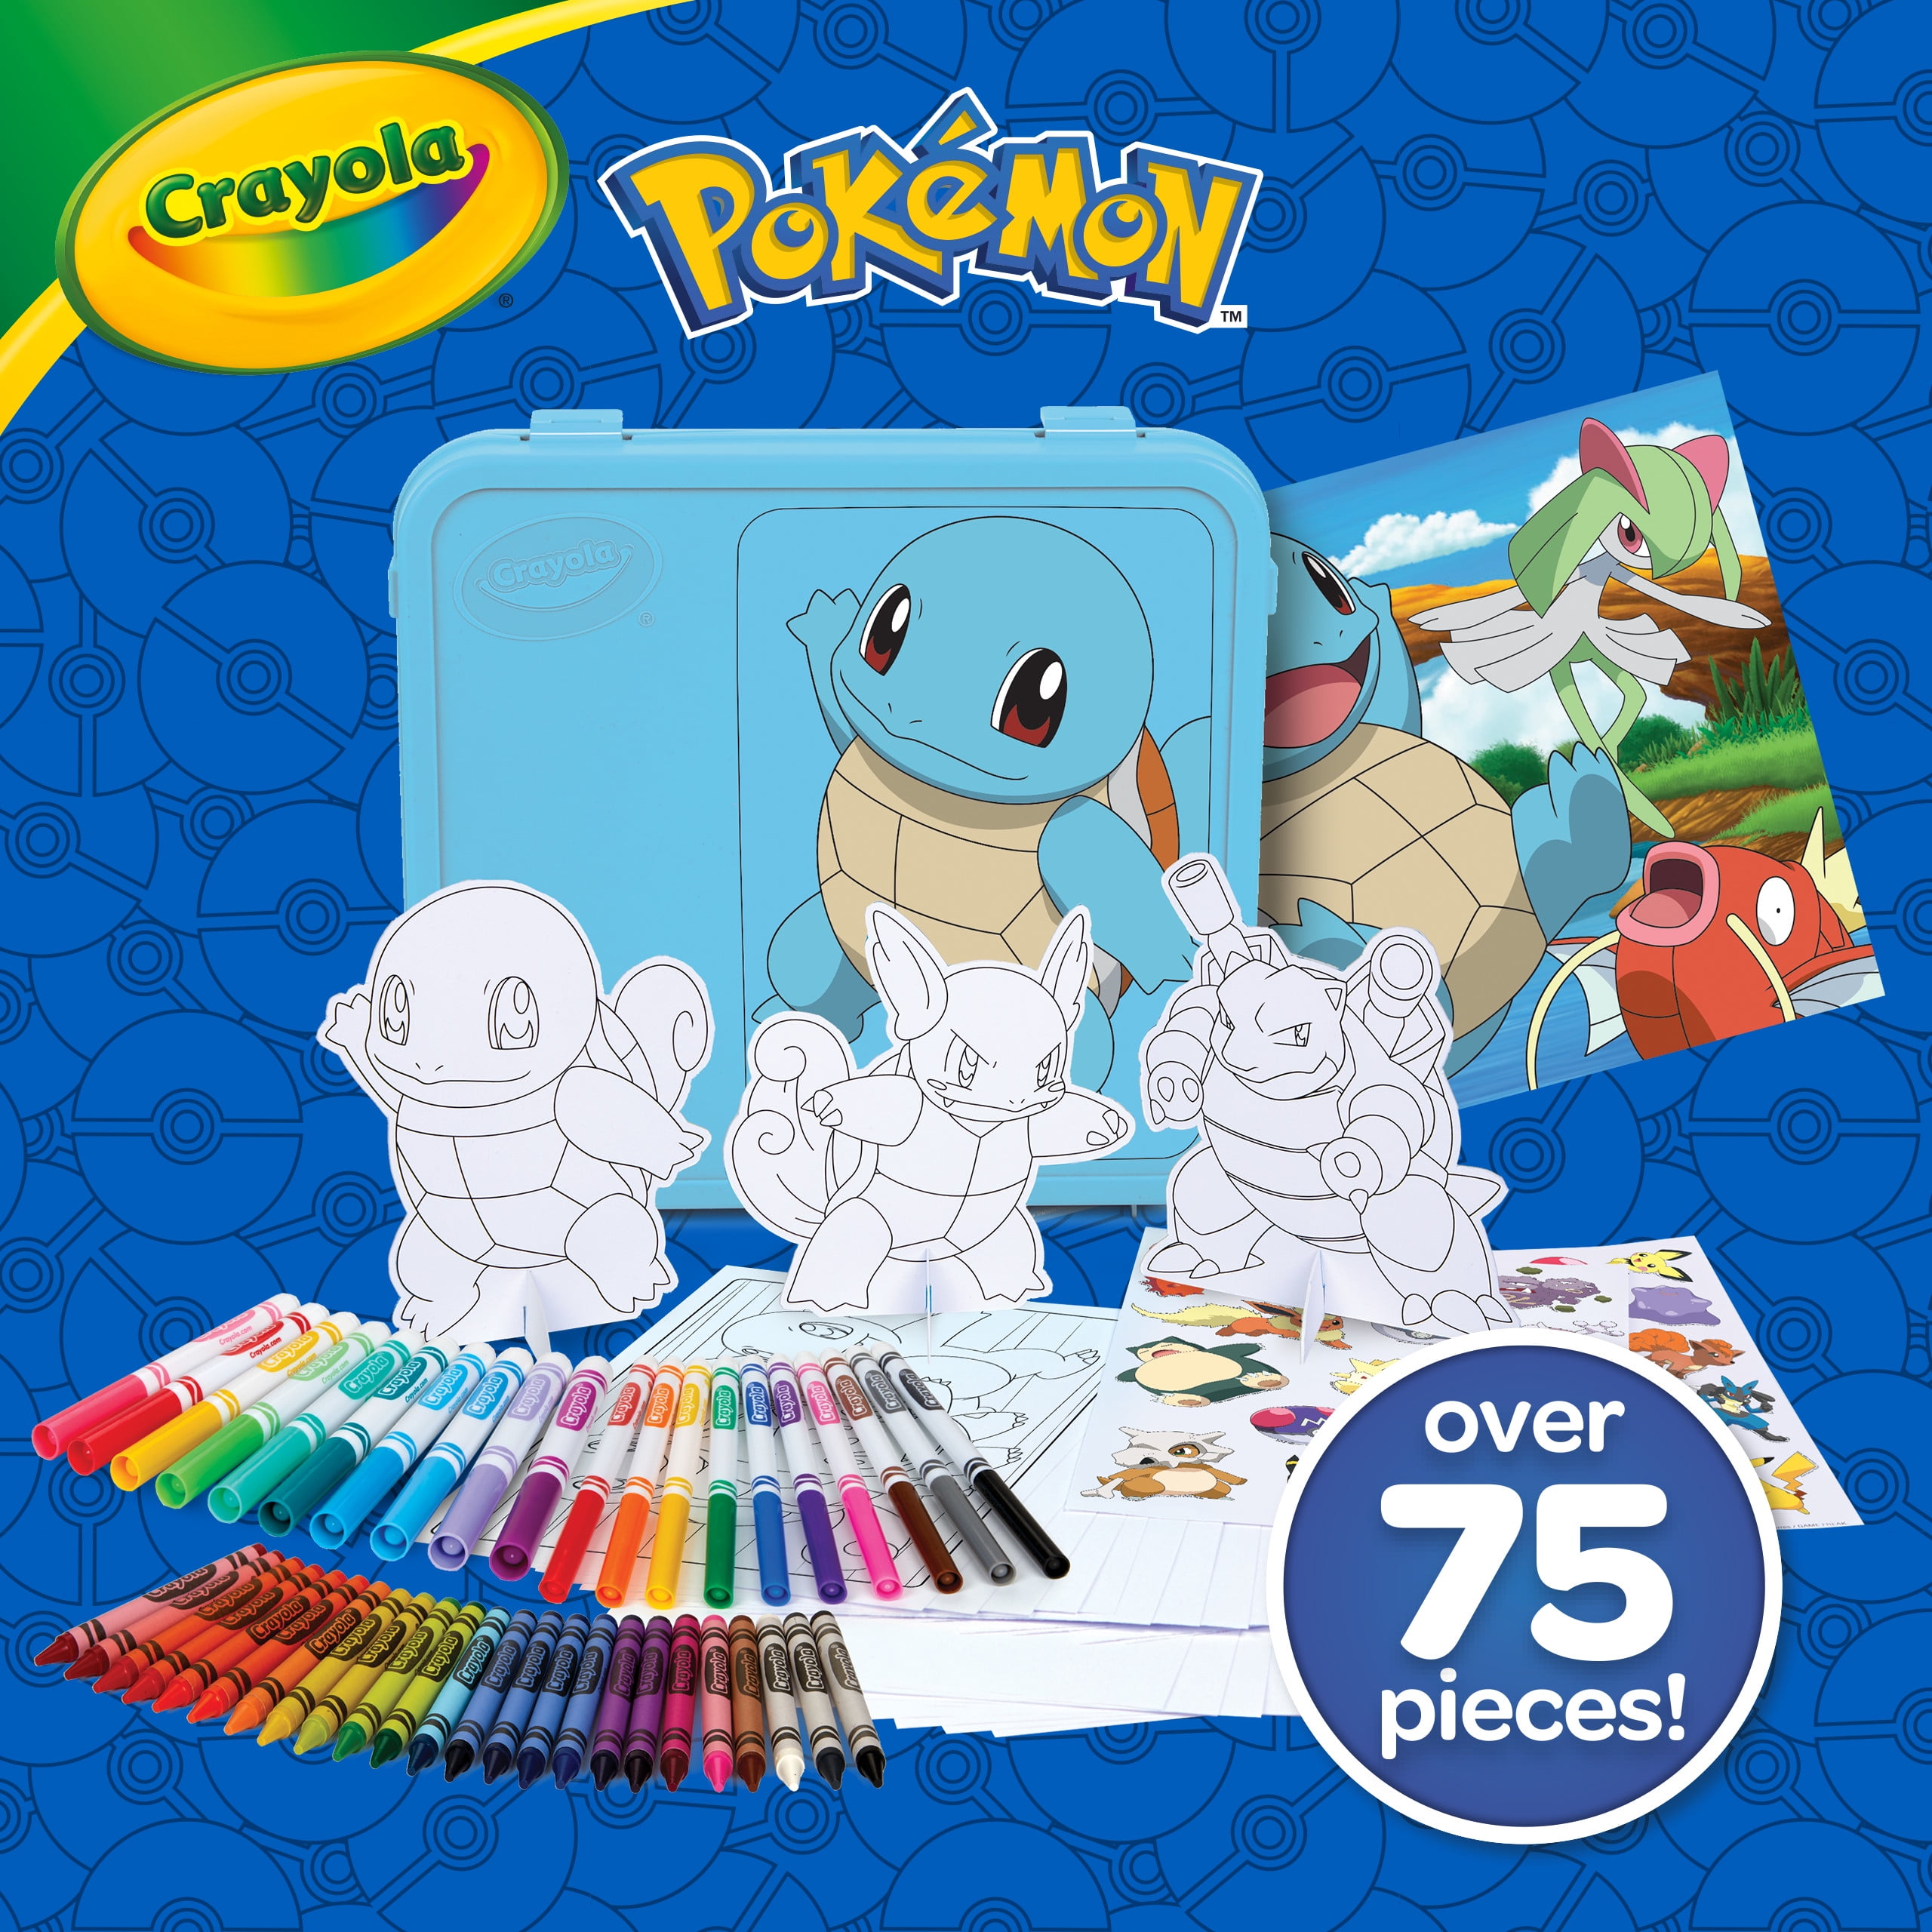 Crayola Pokémon Coloring Art Set, Pikachu, Child, 50 Pieces, Holiday  Coloring Toys, Gifts, Beginner Child